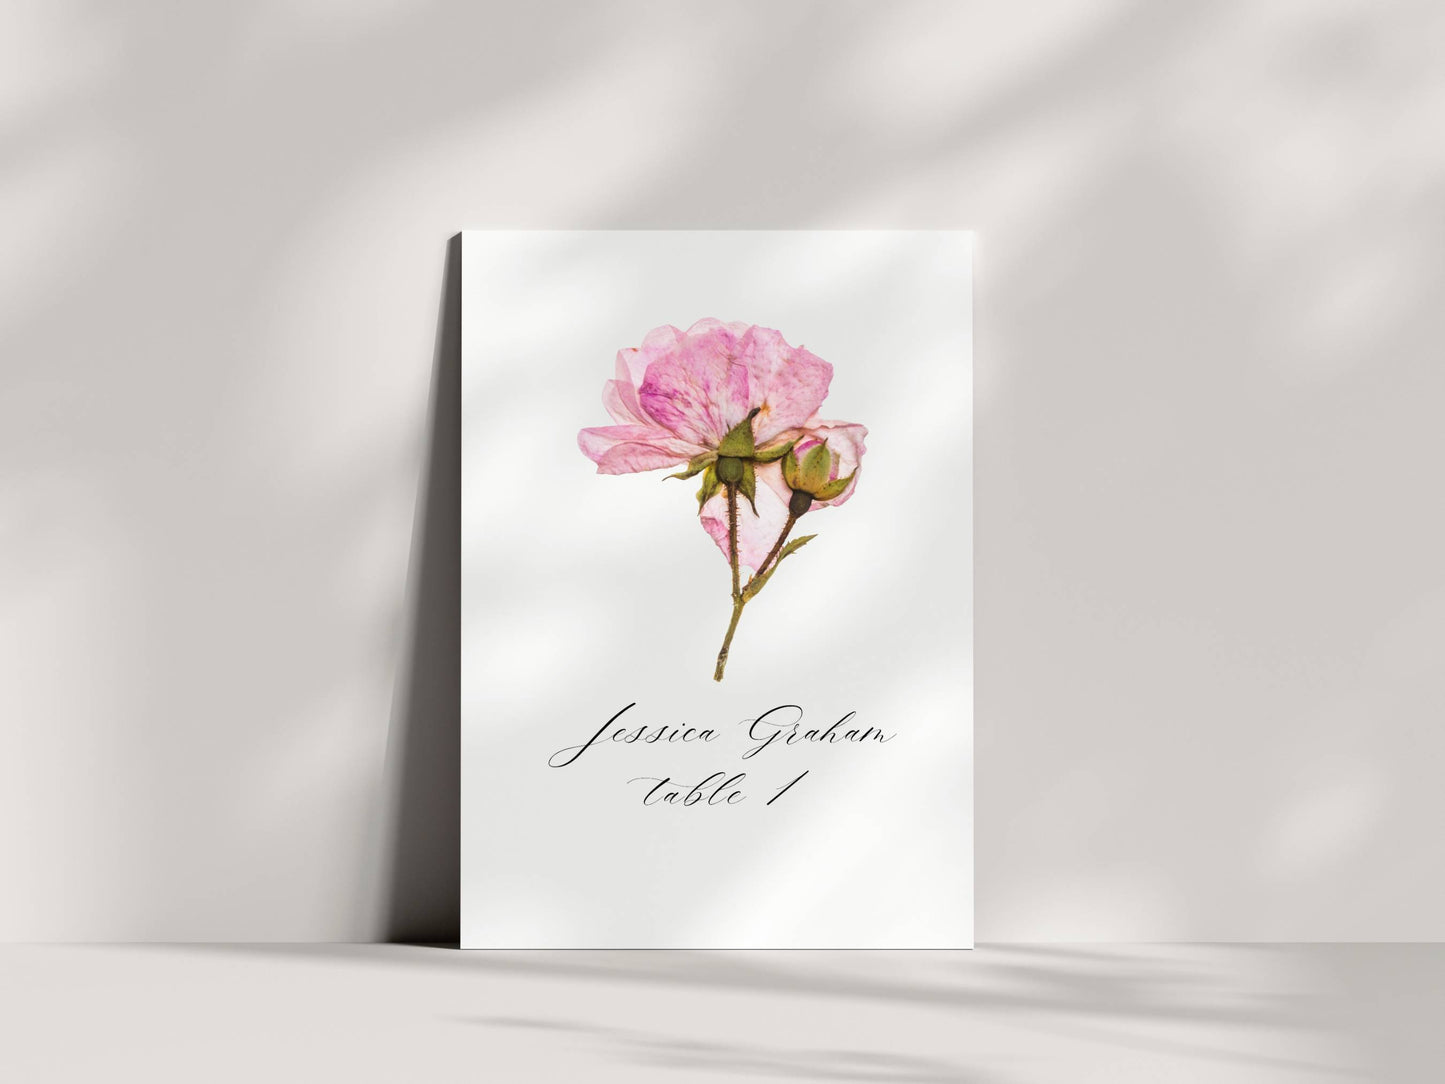 Place Cards with Pressed Flower Illustrations for Weddings, Showers, and Dinner Parties (Set of 25)